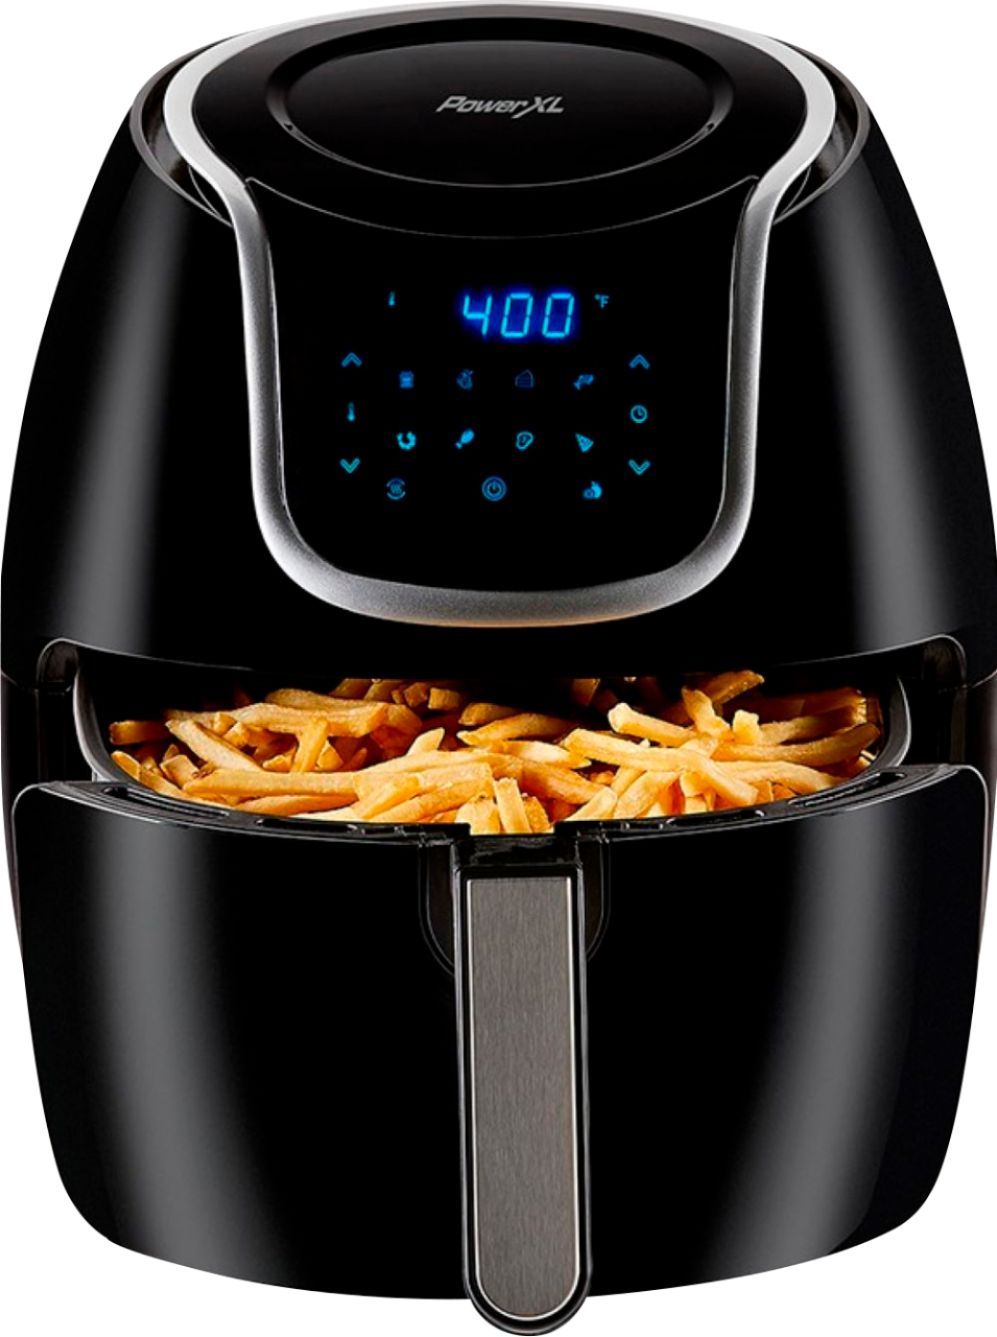 ZYCSKTL Power air Fryer Air Deep Fryer,New Household Air Fryer, Large  Capacity 3.5 Oil-Free Healthy Electric Fryer, Fixed Temperature Air Fryer